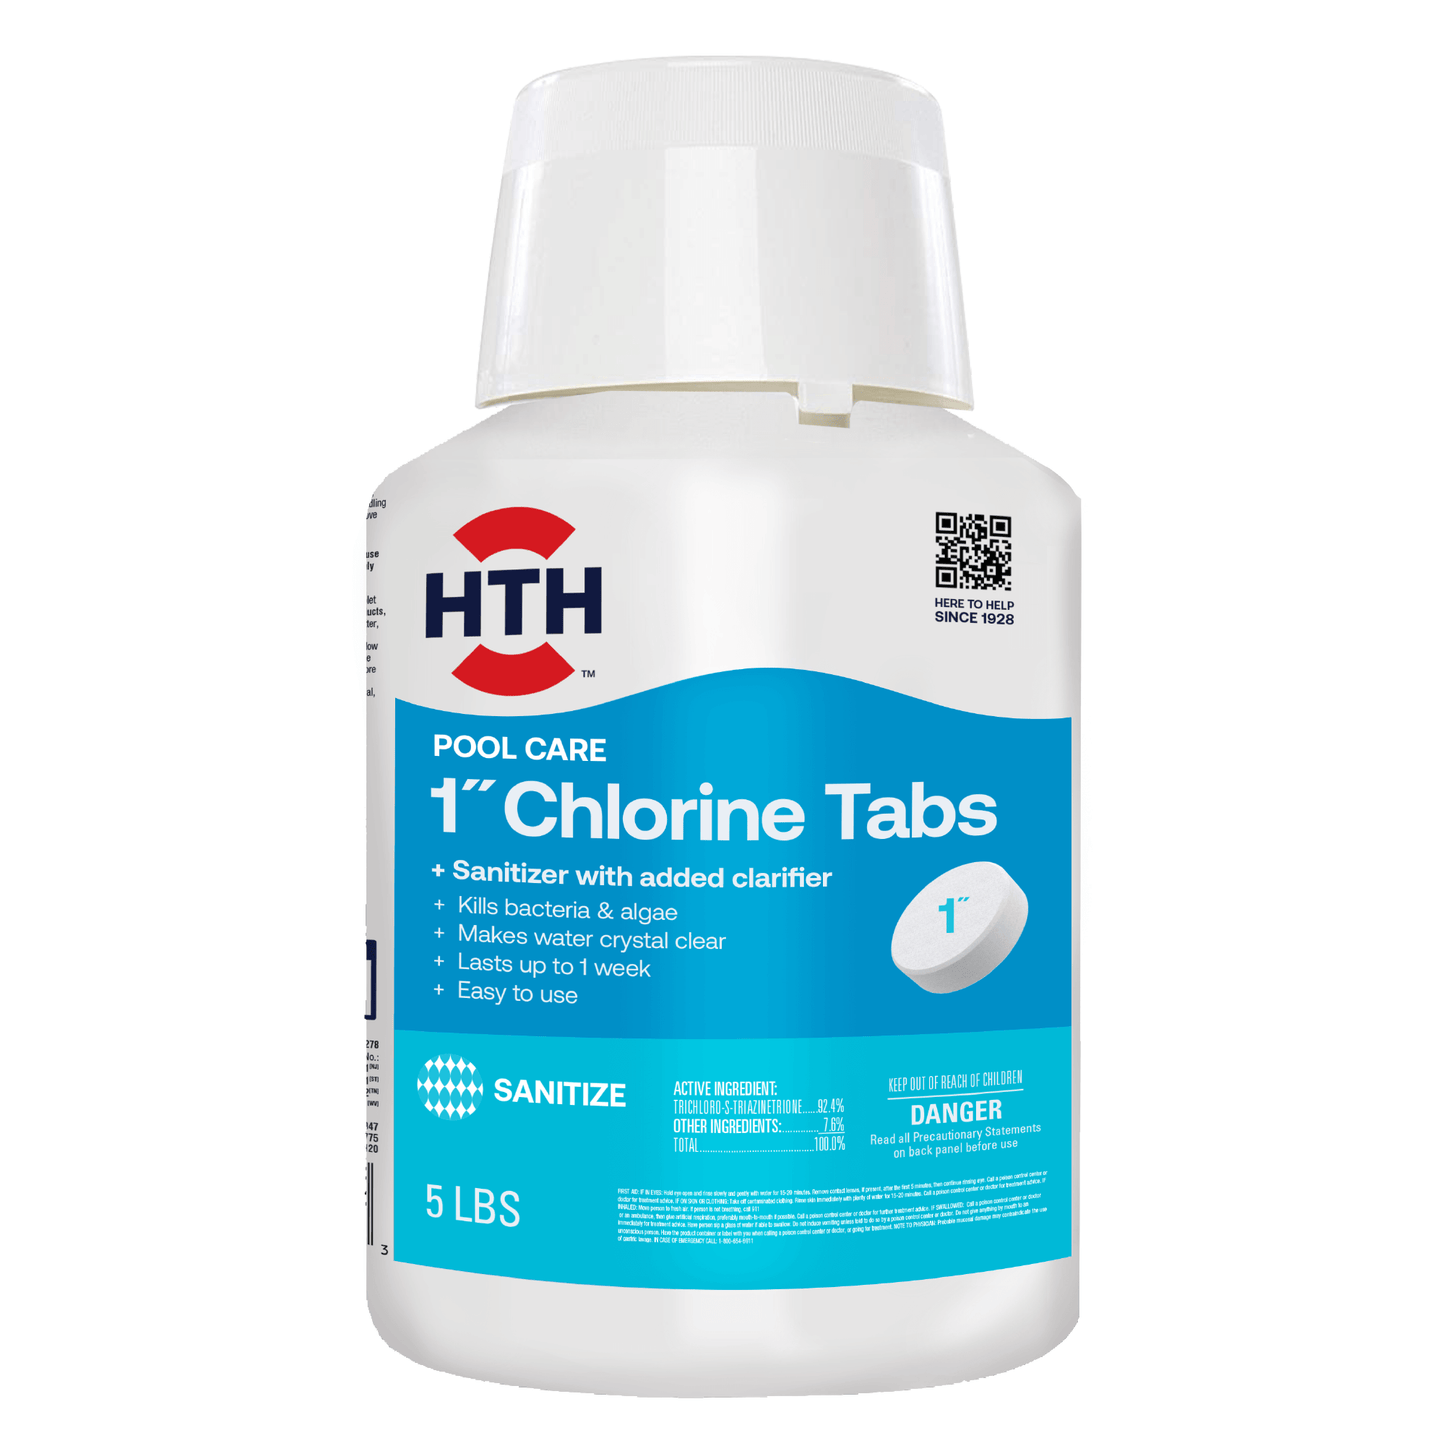 1 Chlorinating Tablets For Hot Tubs,hlorinating Tablets For Small